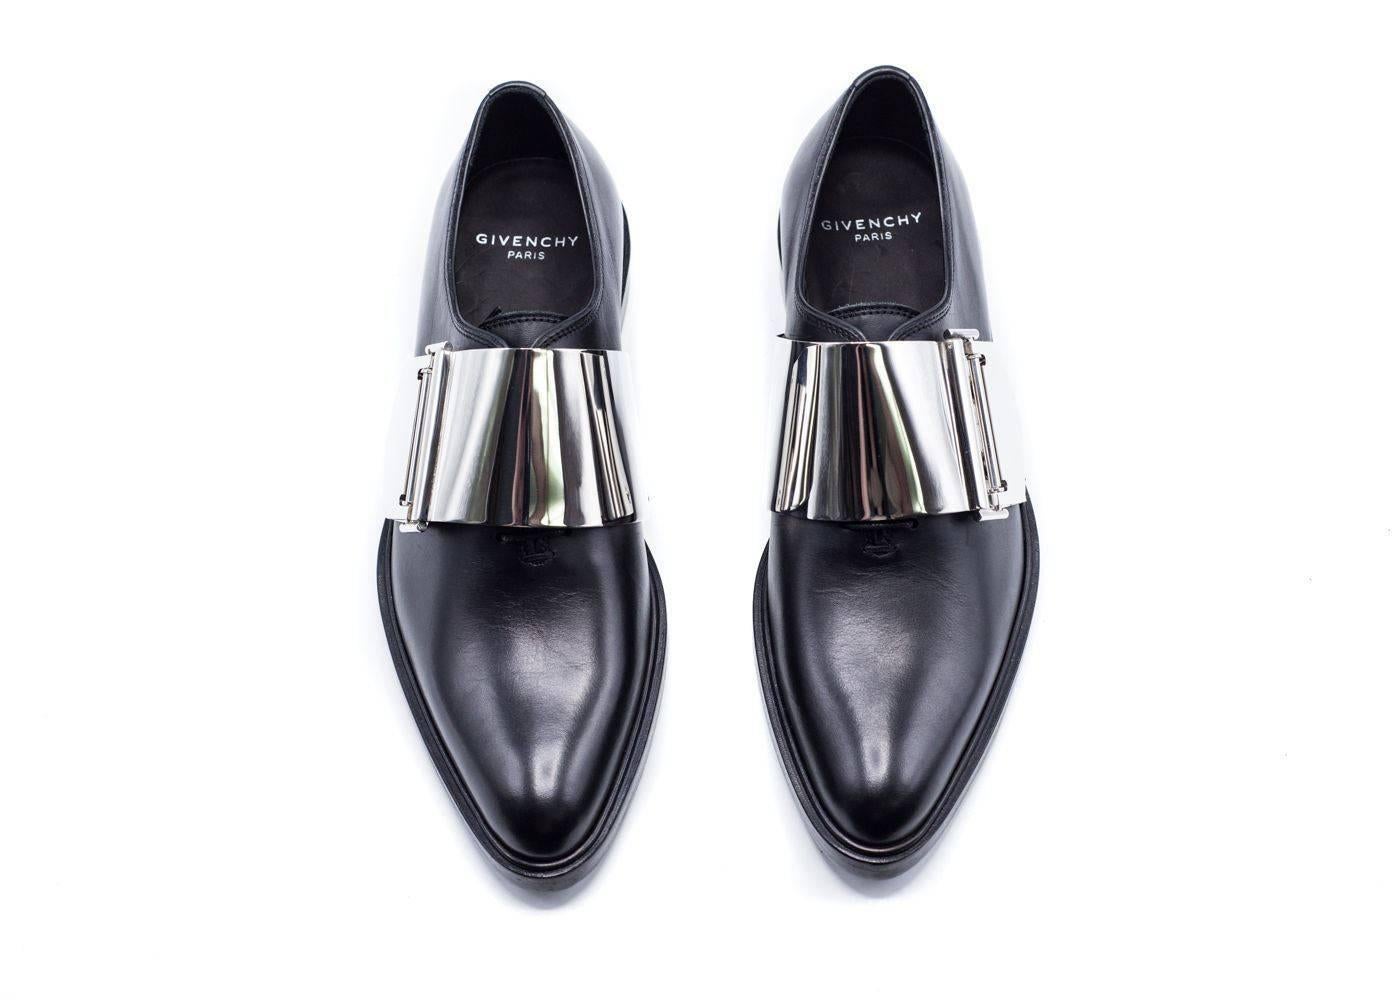 These black oxfords from Givenchy are perfect for a more trendy style to add to your dressy evening wear. Pair with your go to bottoms and dress top for any effortless fashionable and desired look.

Composition: 100% Calfskin Leather
Leather